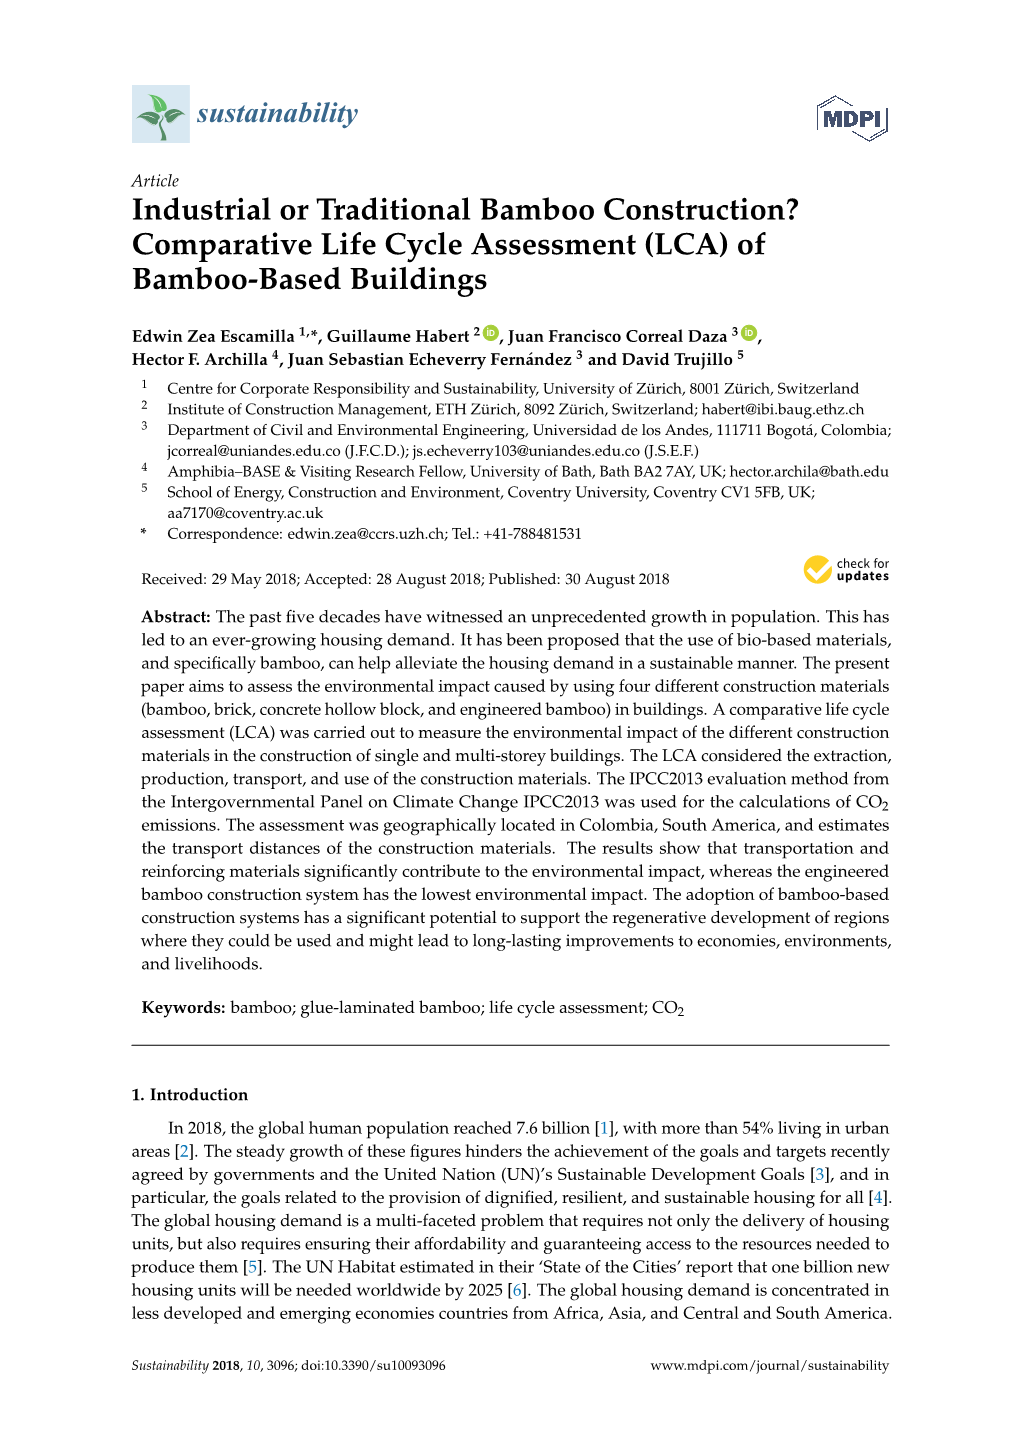 Industrial Or Traditional Bamboo Construction? Comparative Life Cycle Assessment (LCA) of Bamboo-Based Buildings